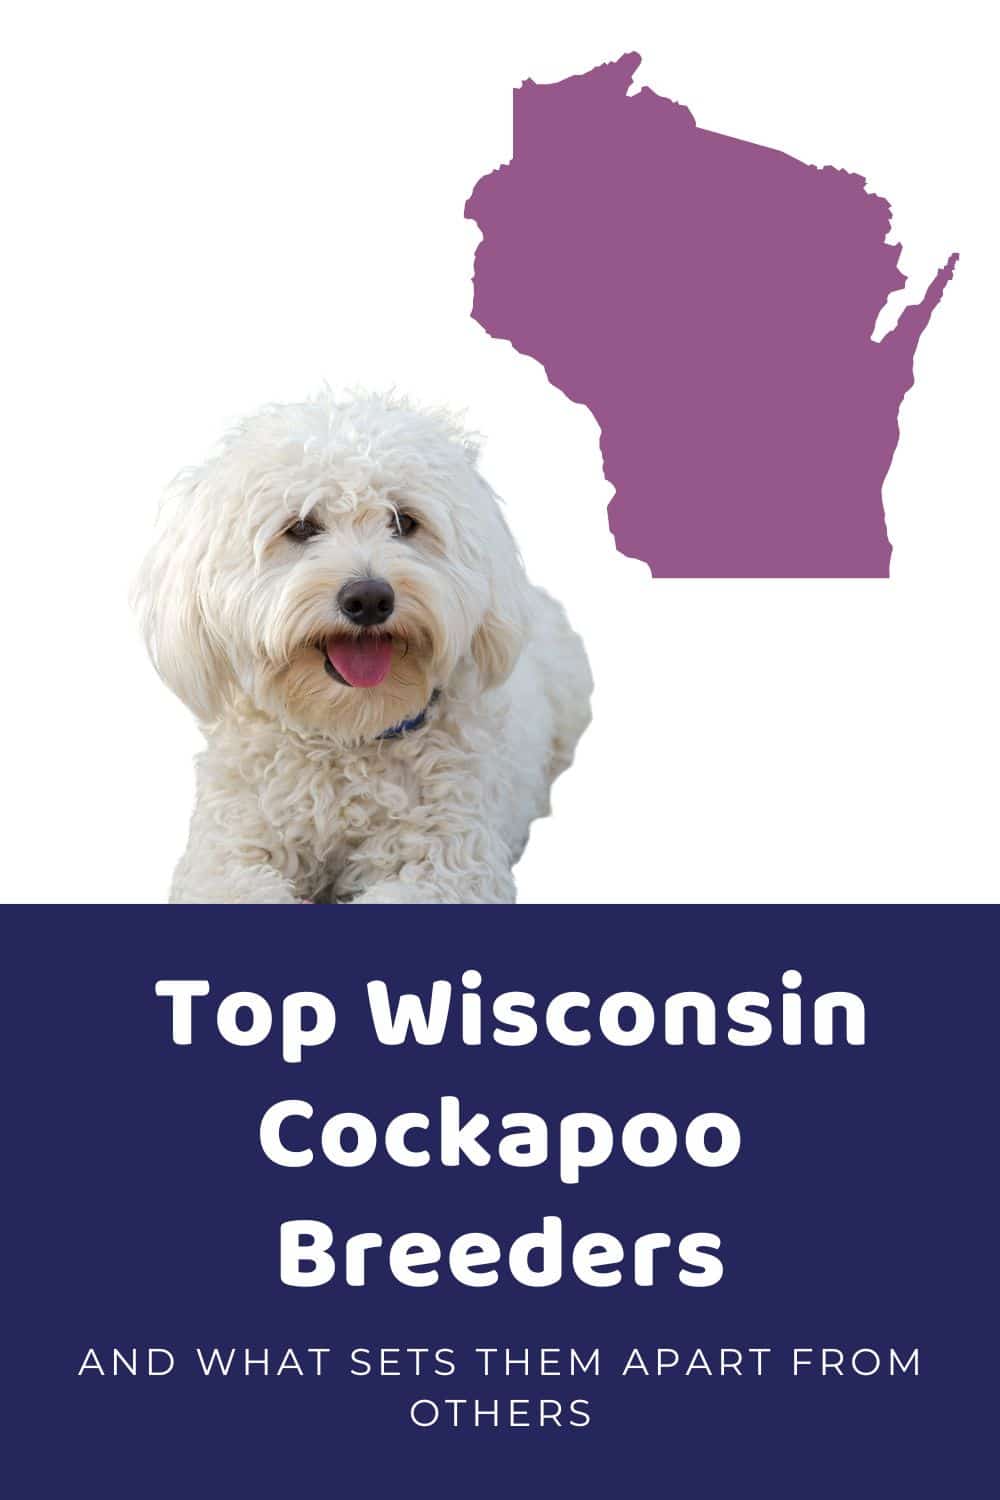 List Of Ethical Cockapoo Breeders In Wisconsin